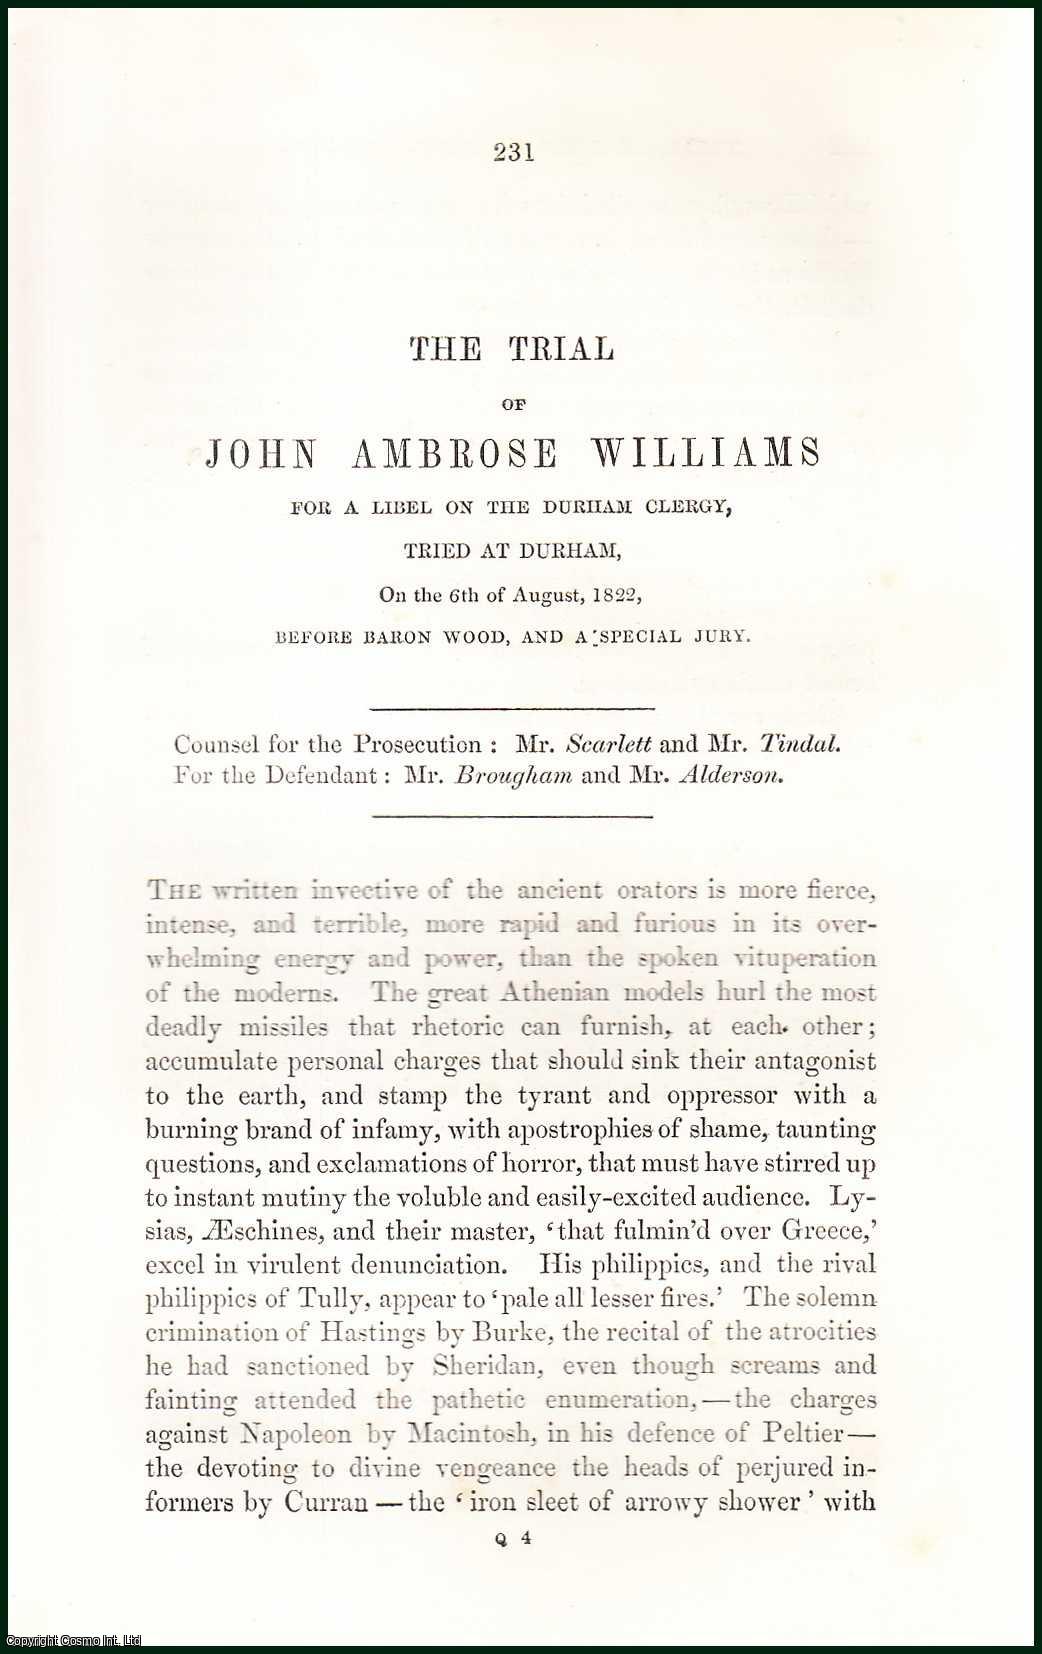 [Trial] - The Trial of John Ambrose Williams for a Libel on The Durham Clergy, Tried at Durham before Baron Wood, & a Special Jury, 1822. An uncommon original article from the Collected State Trials, 1850.